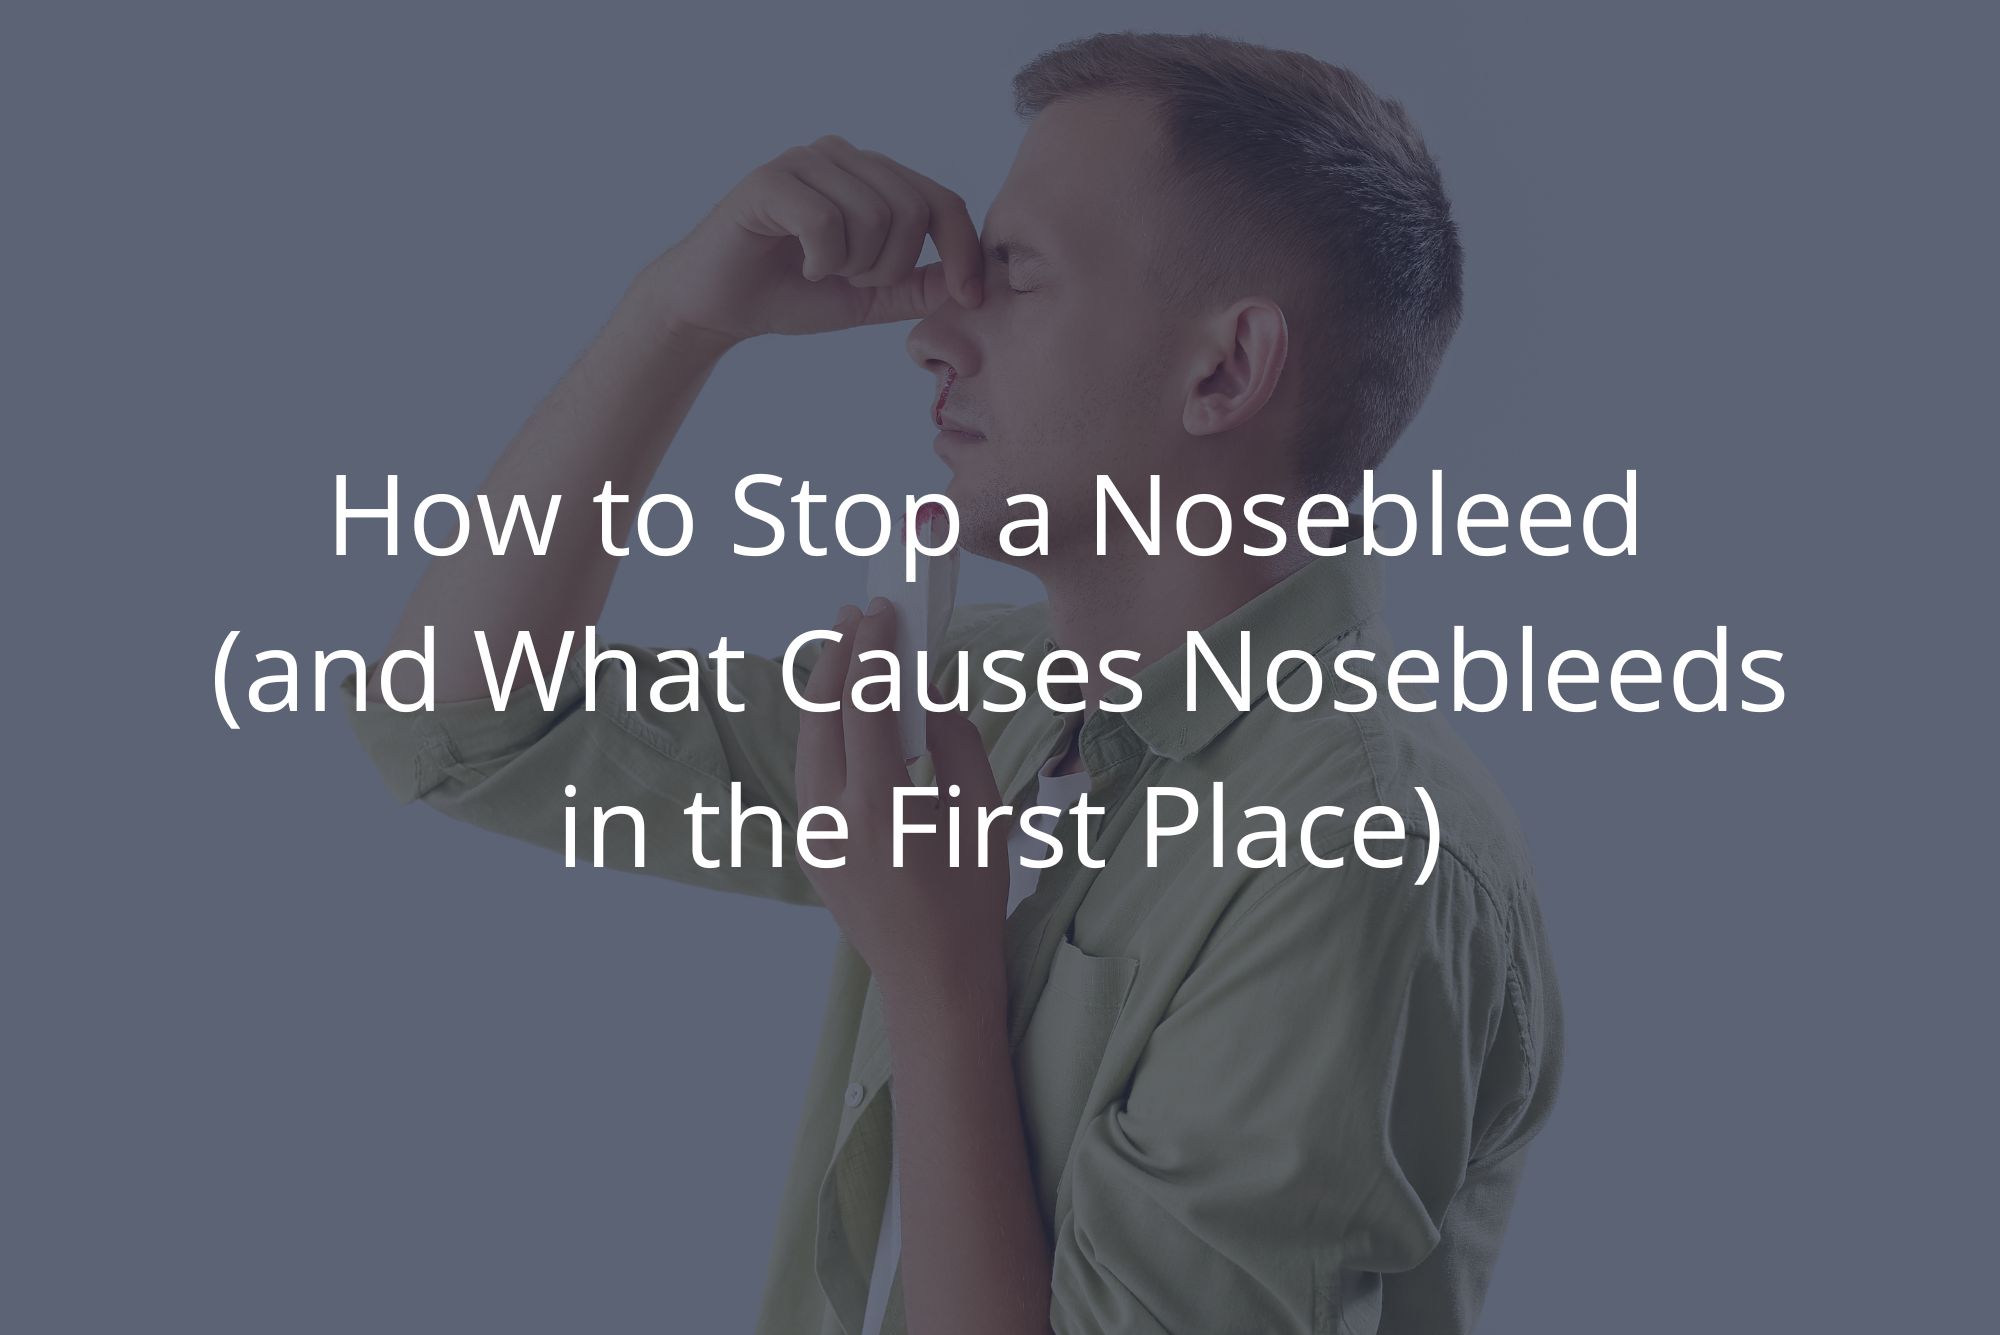 A man in a green shirt pinches his nose after learning how to stop a nosebleed with a dark overlay.